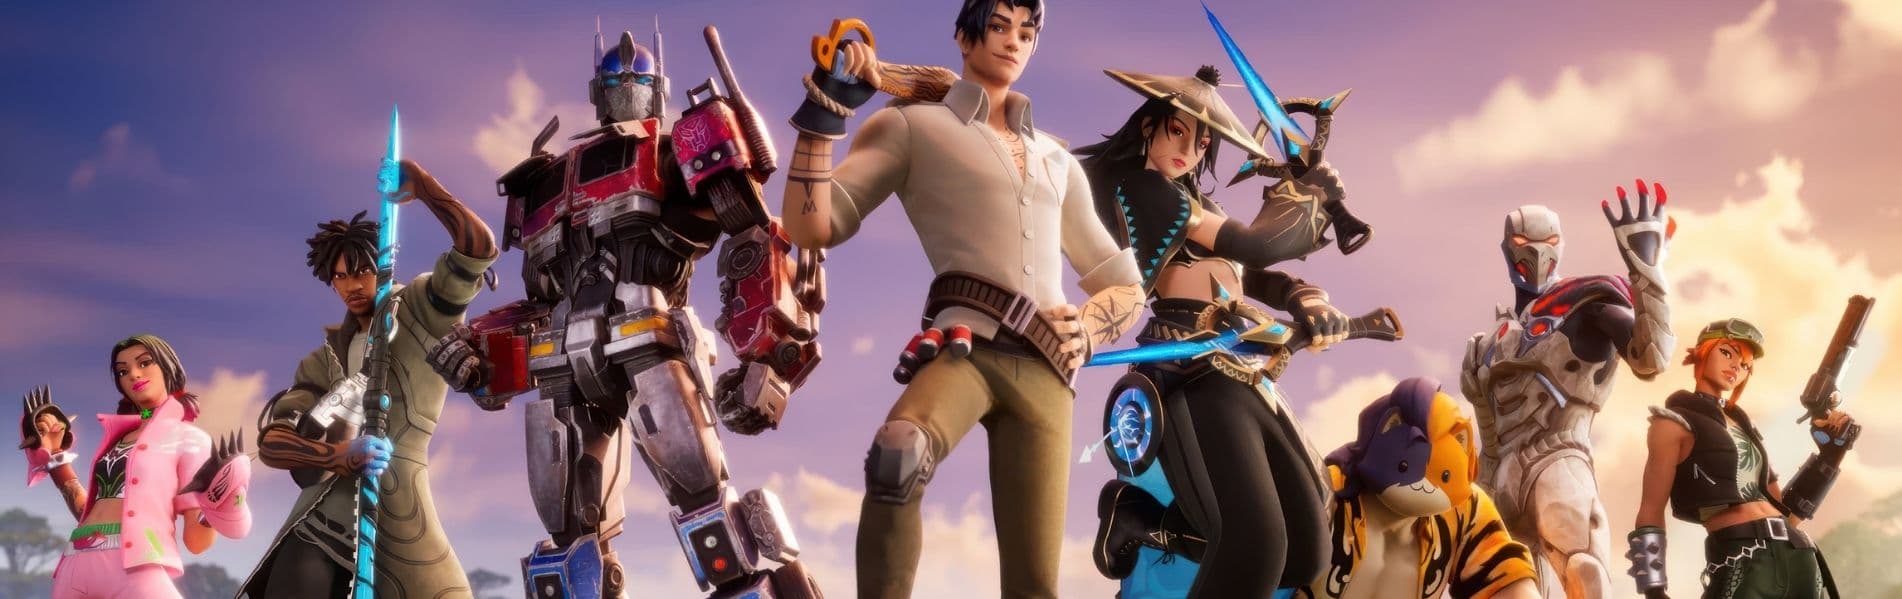 Fornite Game Store Banner 1